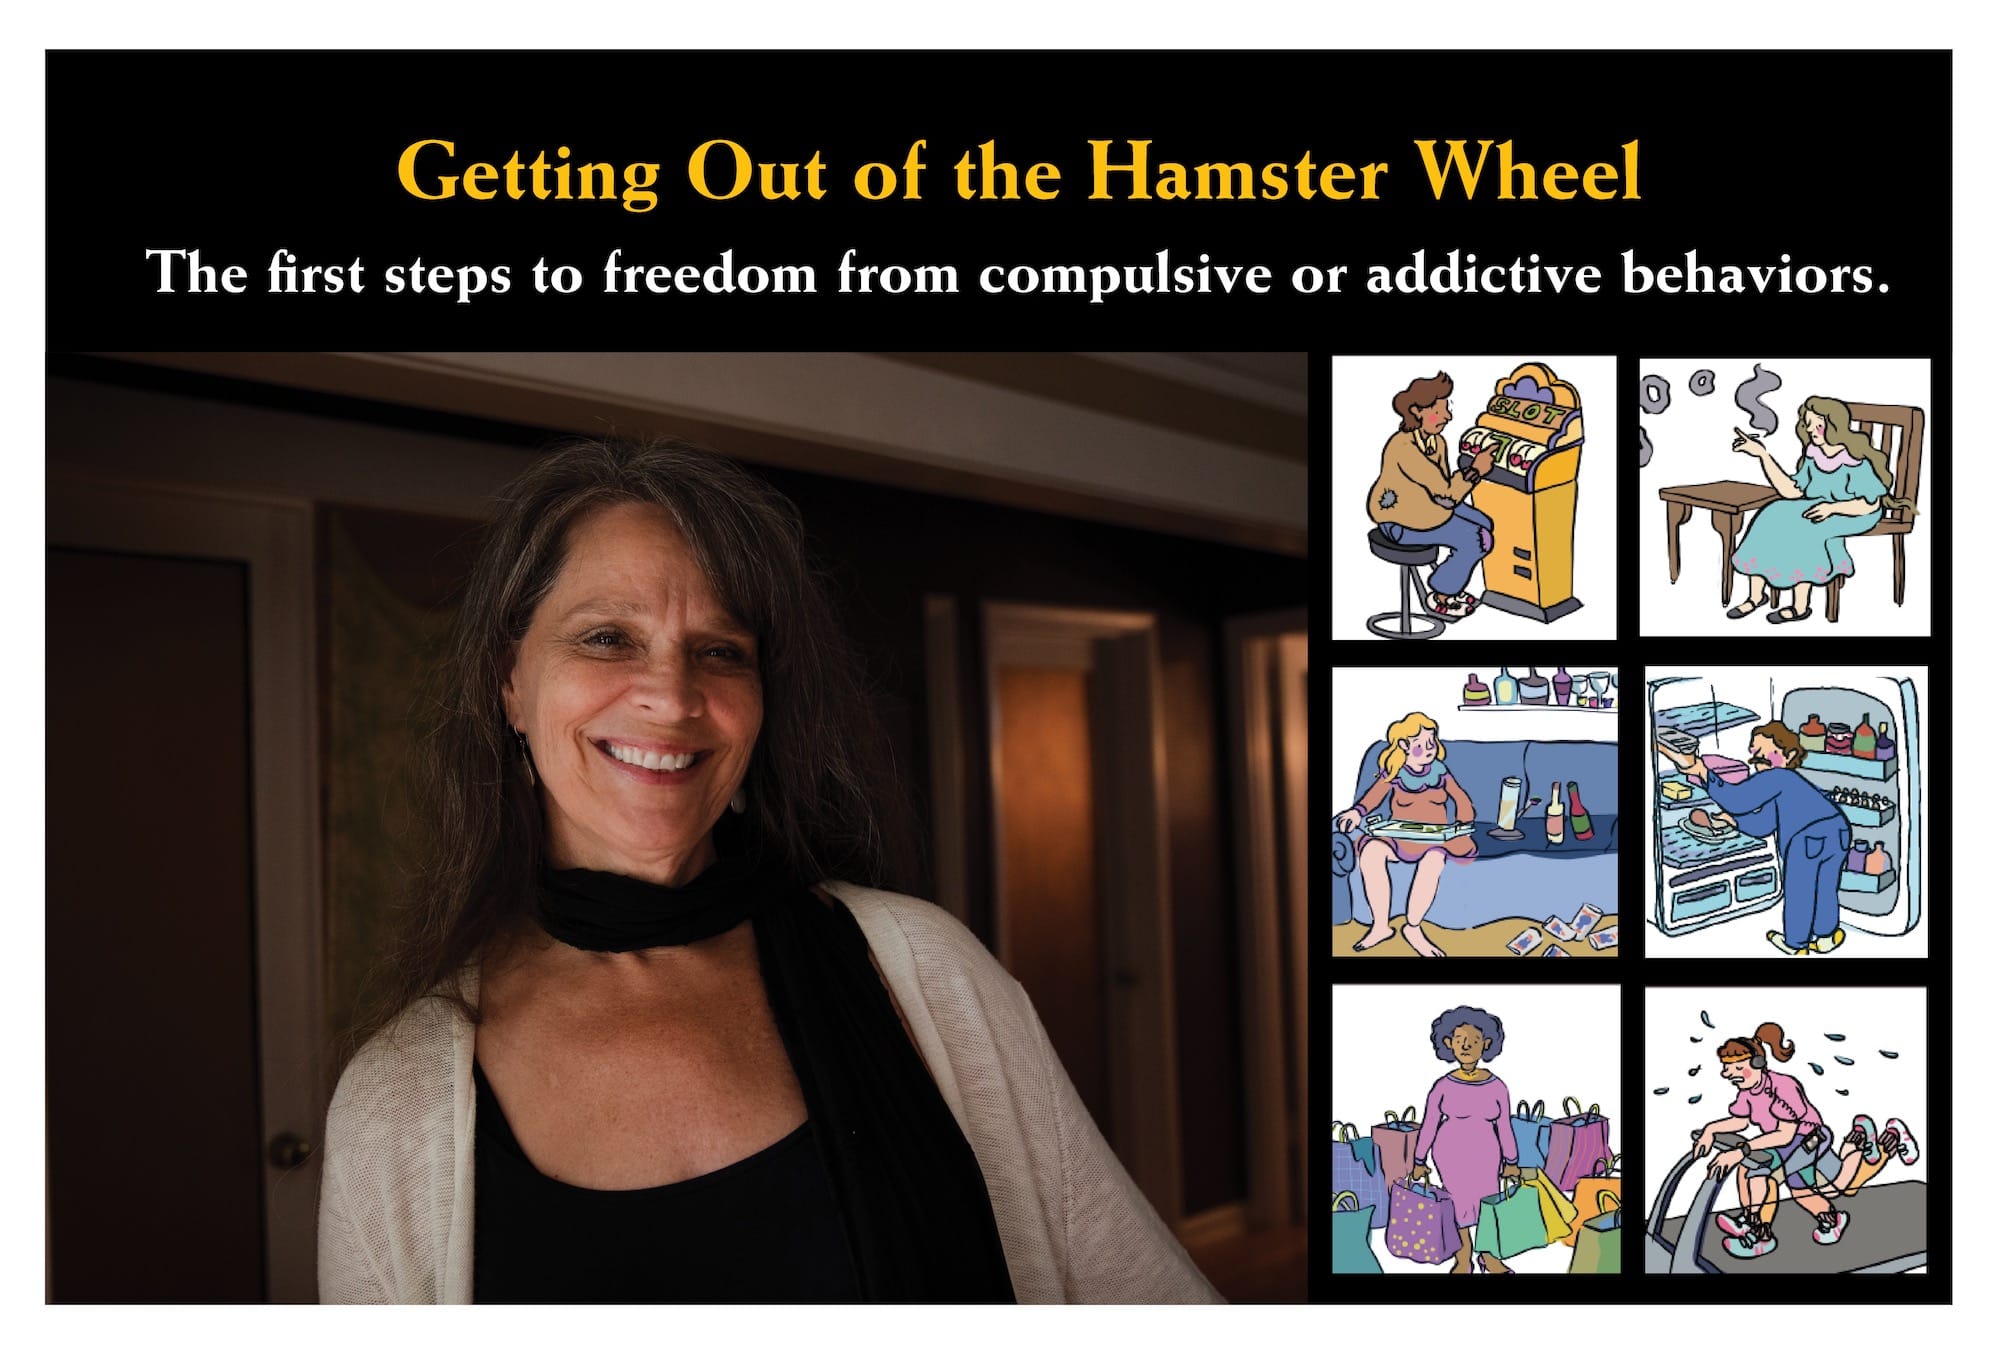 Getting Out of the Hamster Wheel